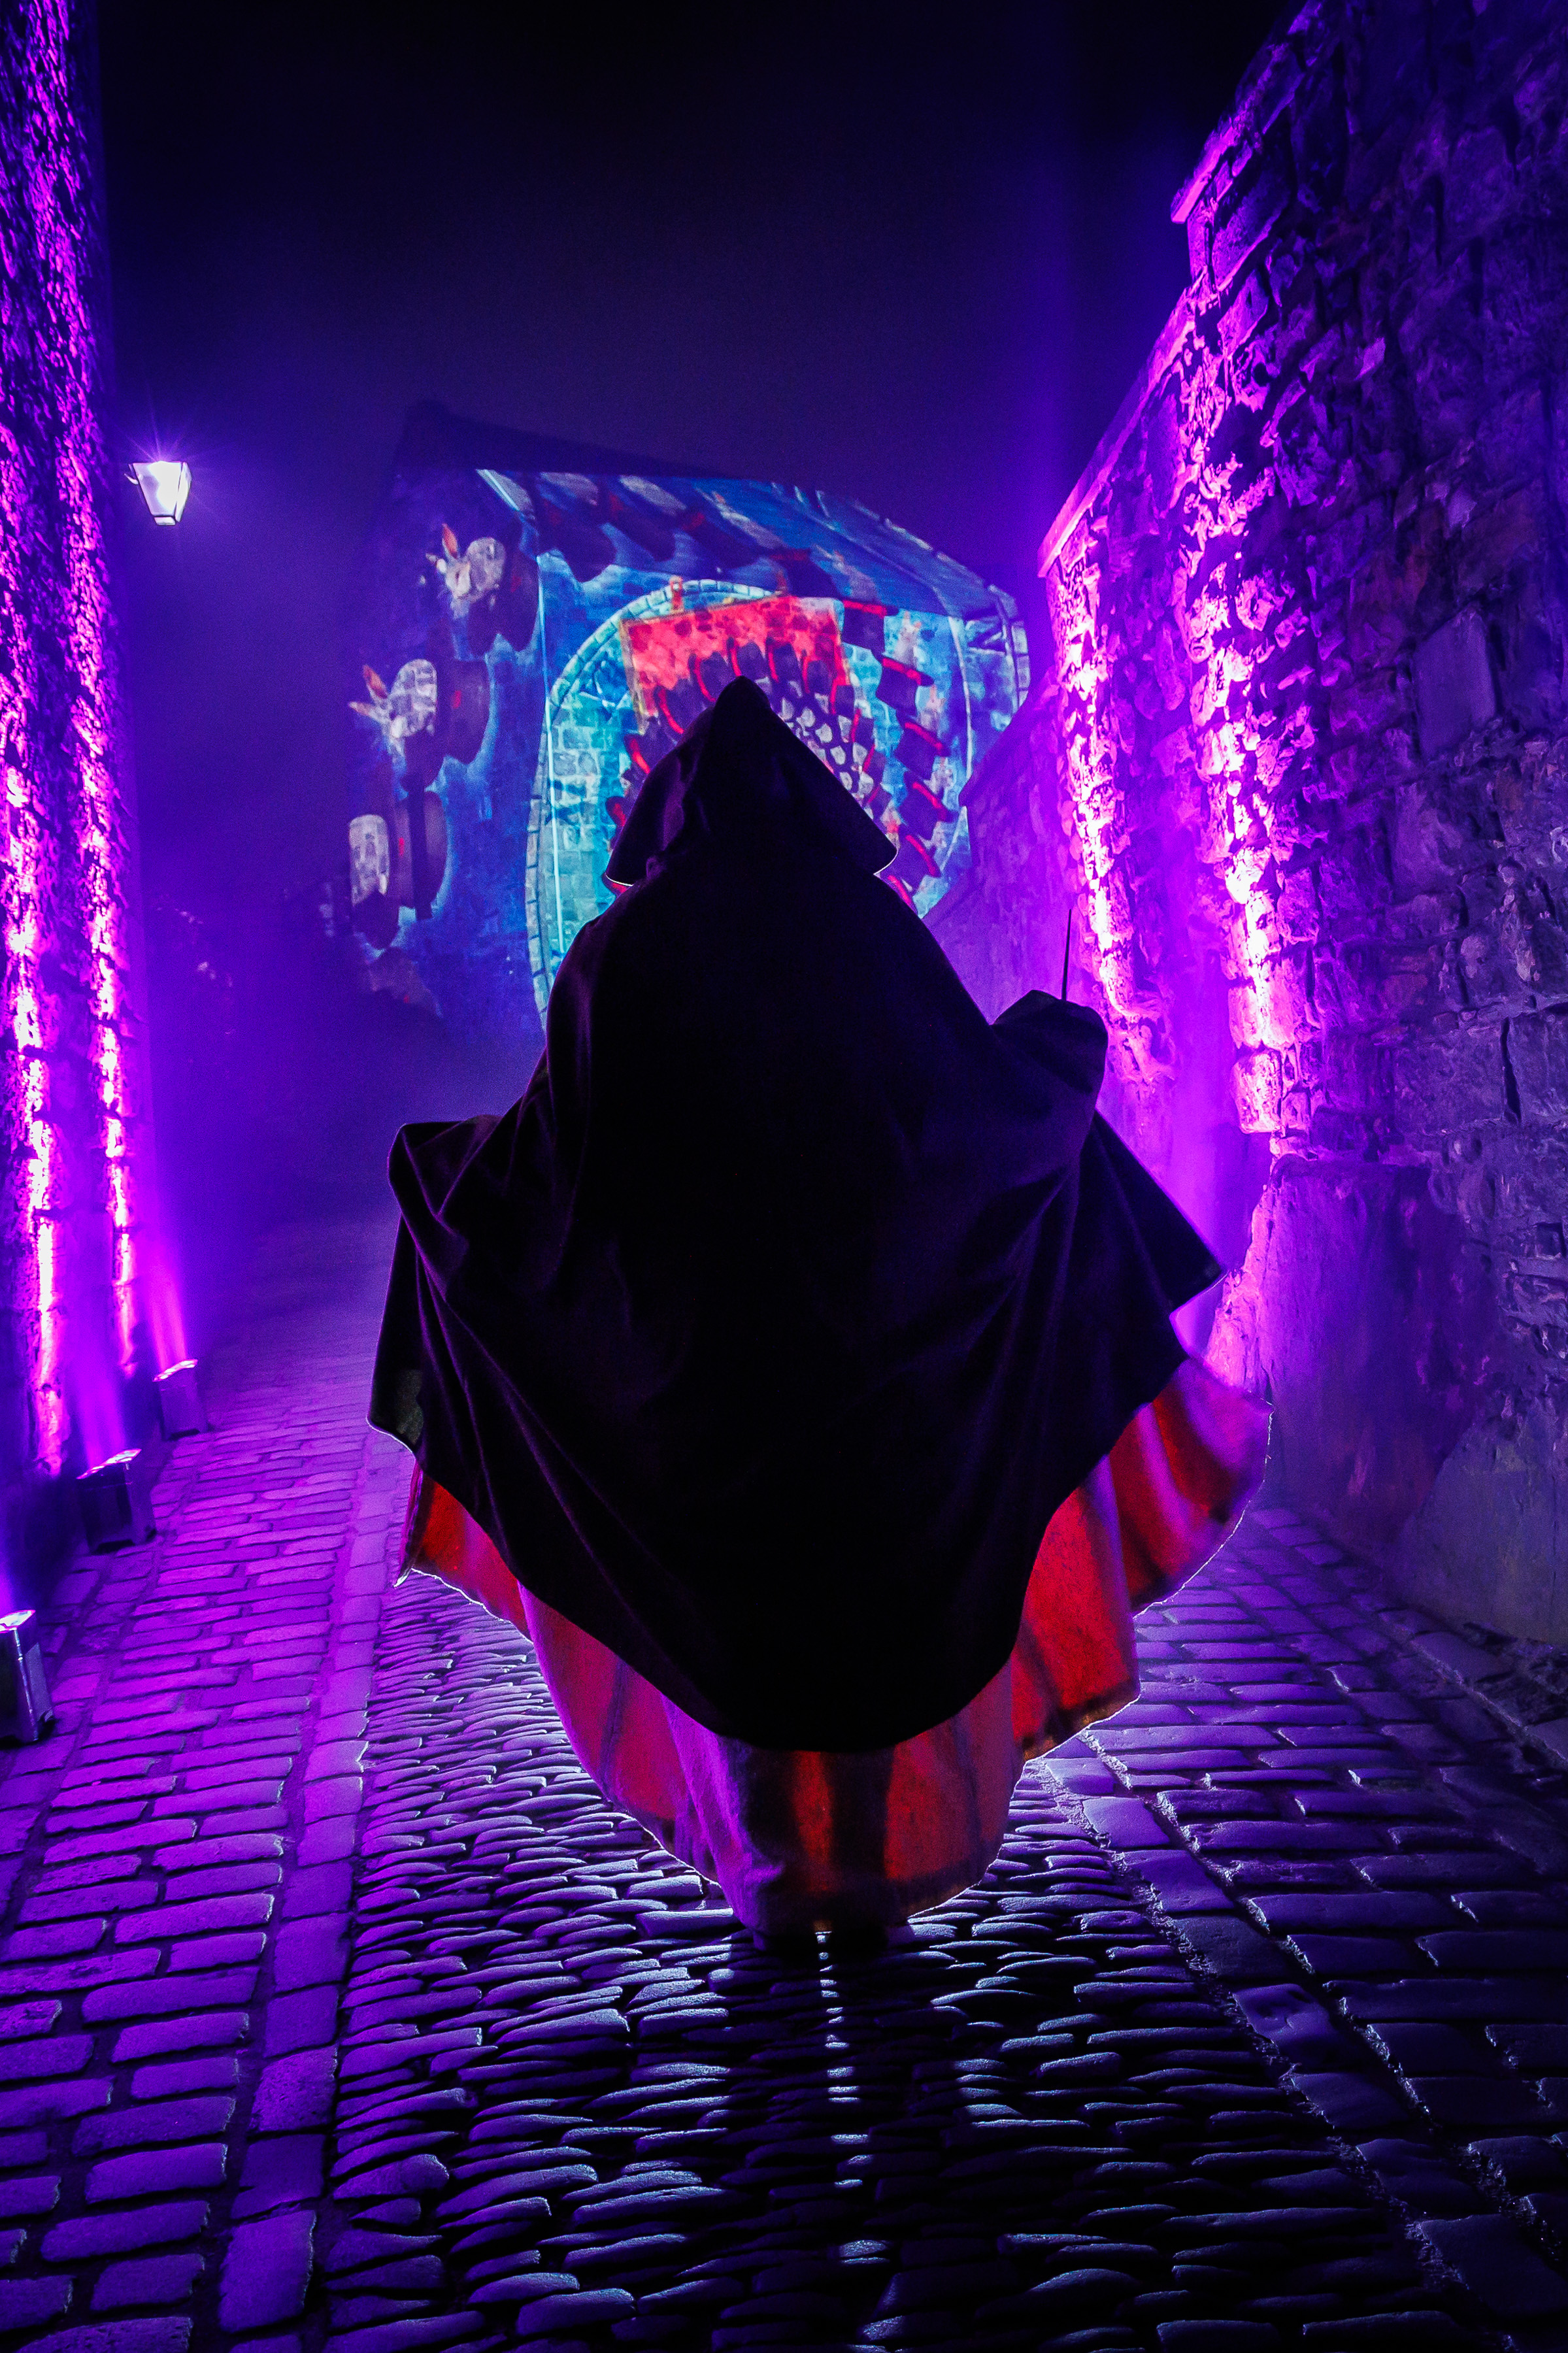 Edinburgh Castle of Light will focus on magic and mystery this year.